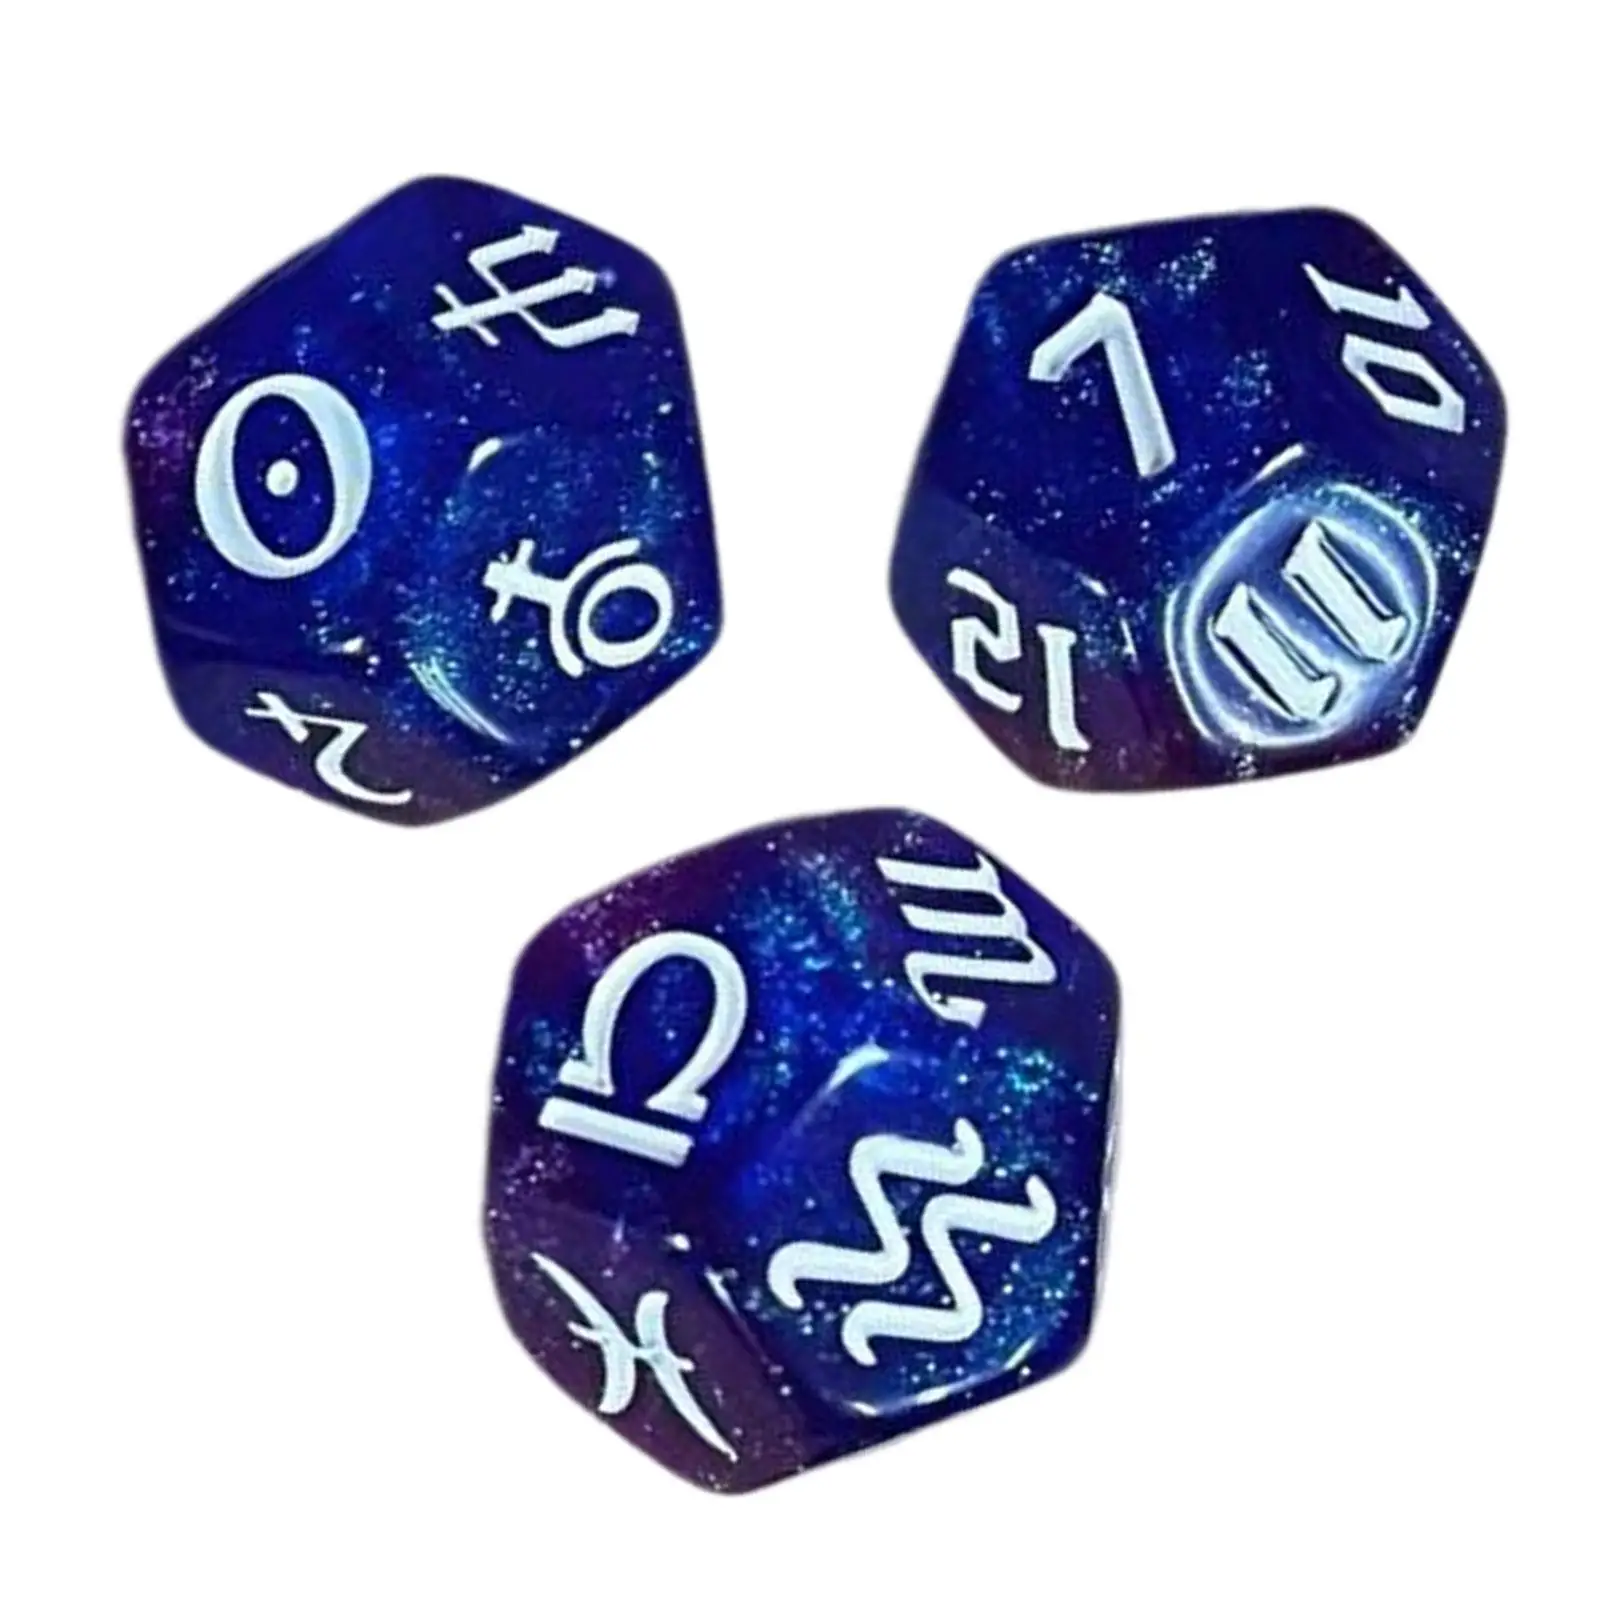 3 Pieces Polyhedral Dice 12 Sided Dice Acrylic Board Games Constellation Sign Dice for Family Gathering Constellation